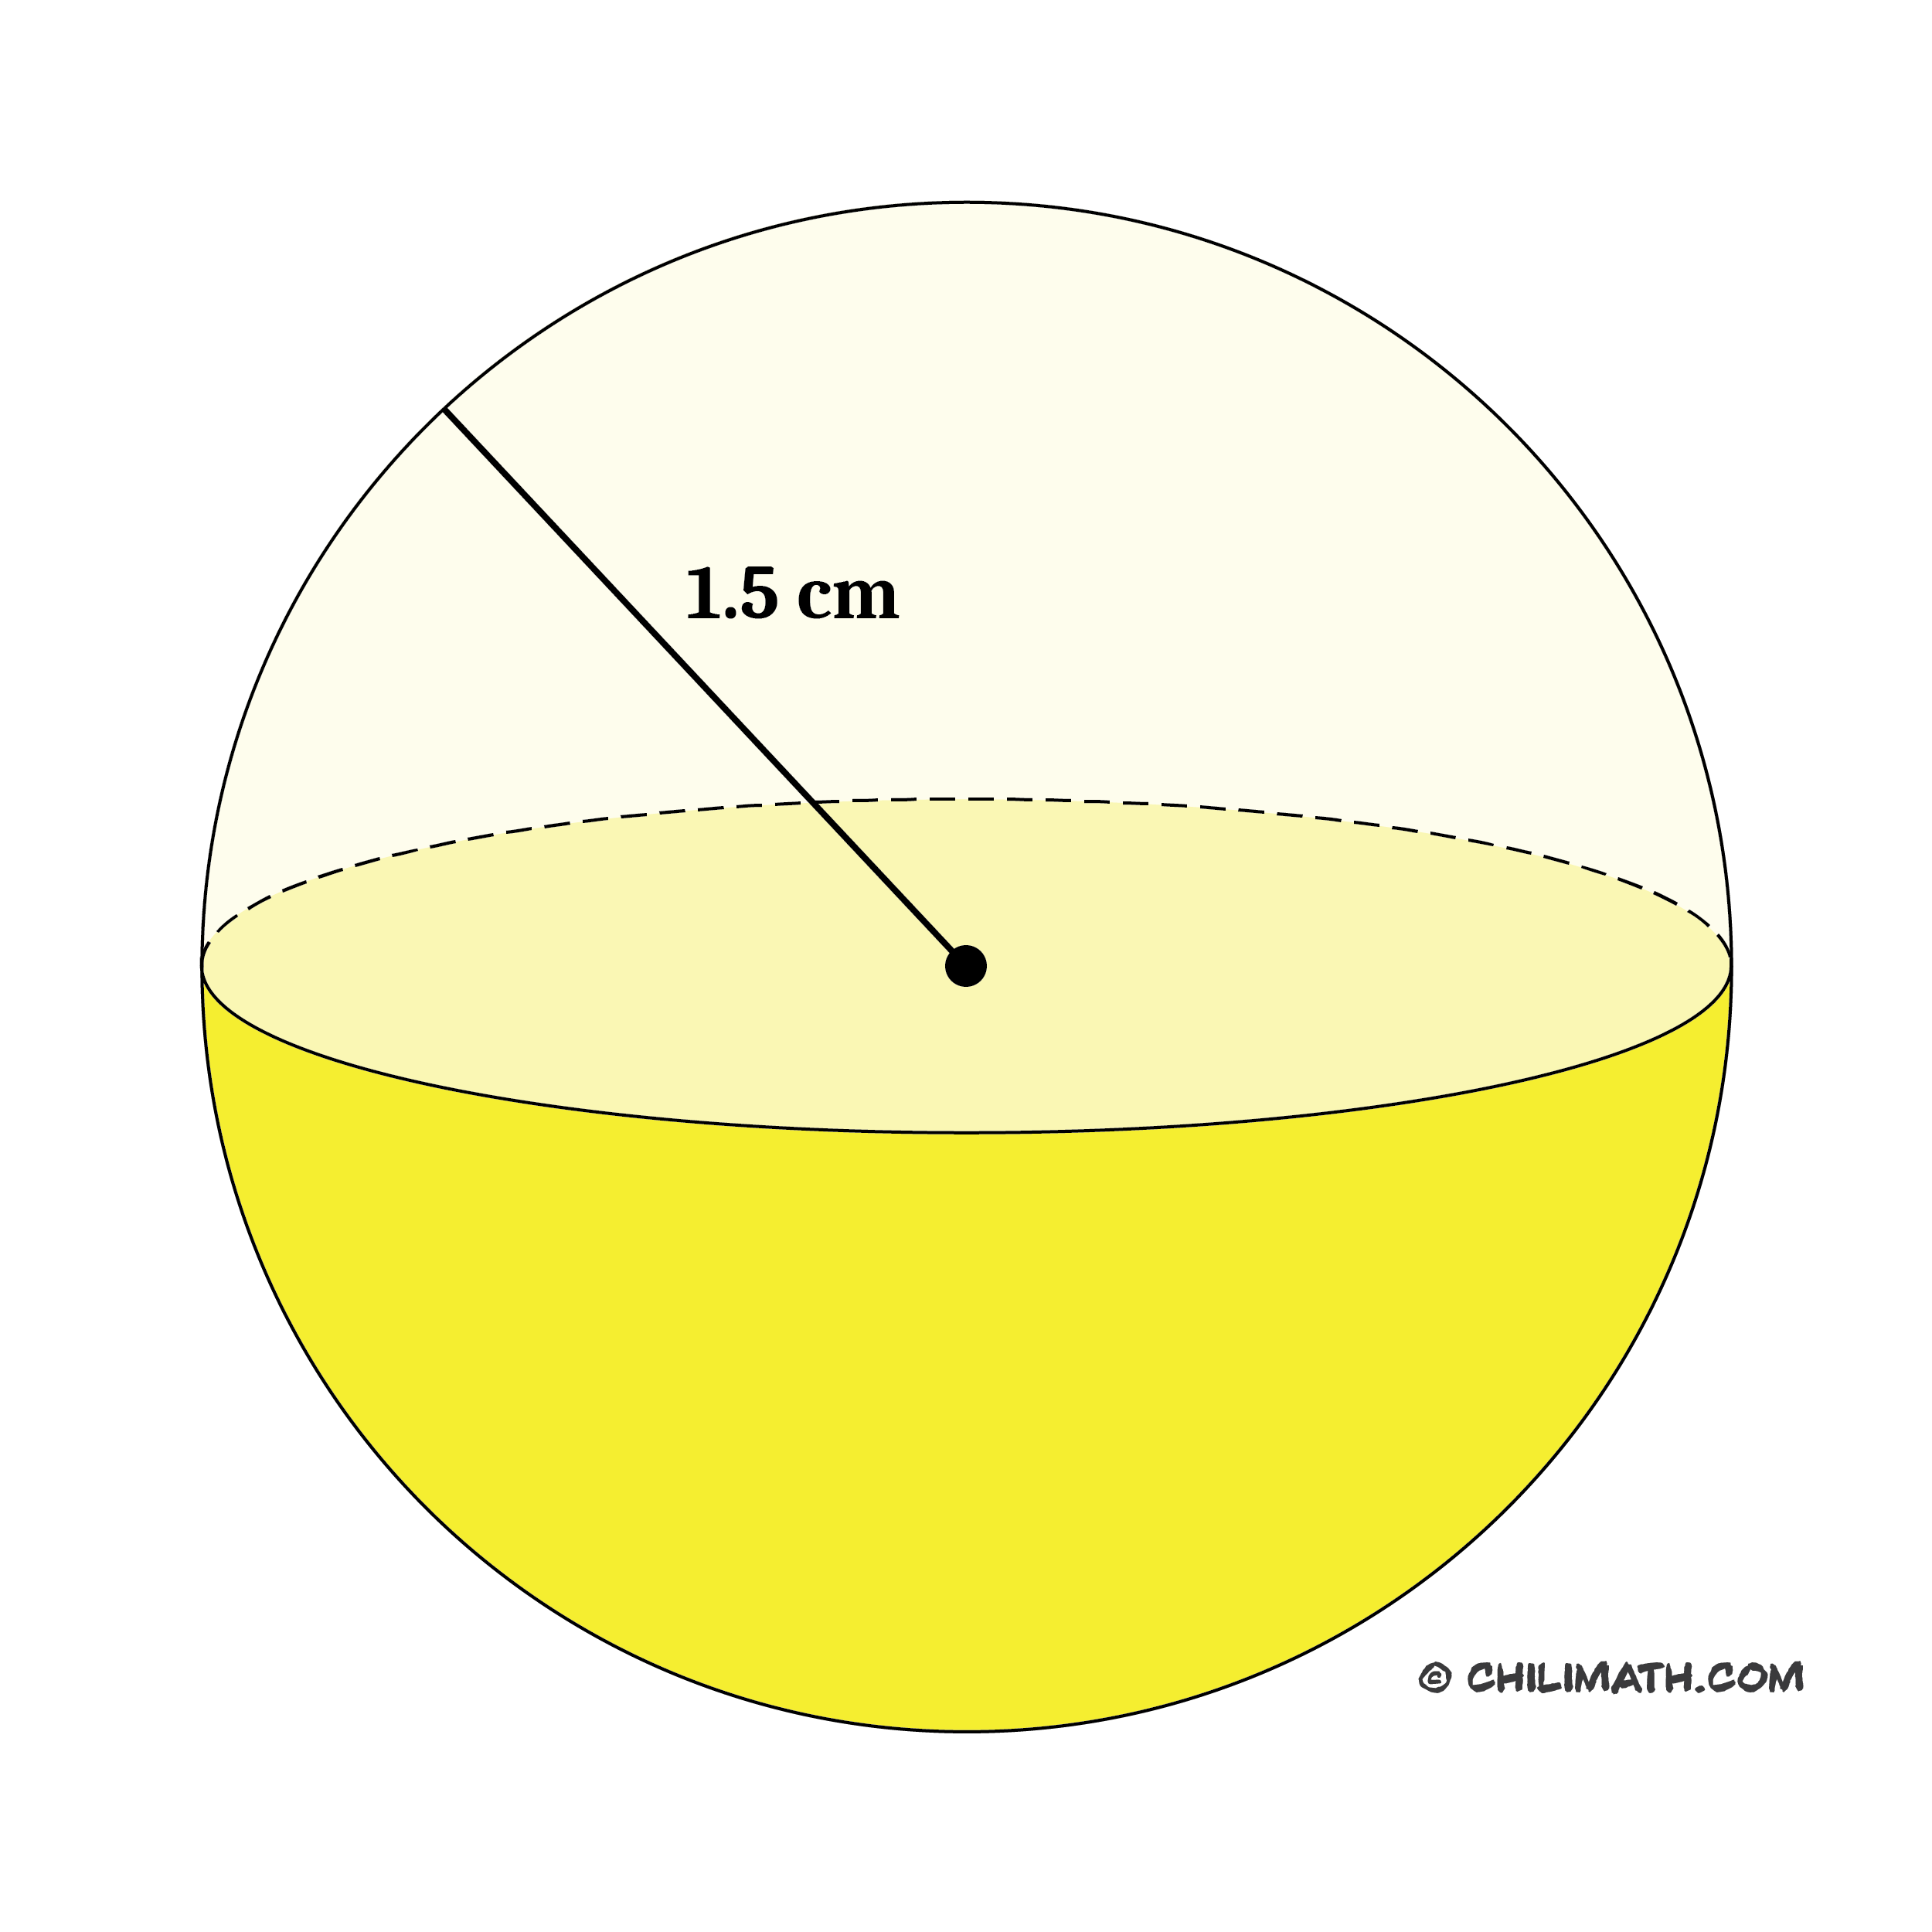 a yellow sphere with a radius of 1.5 centimeters